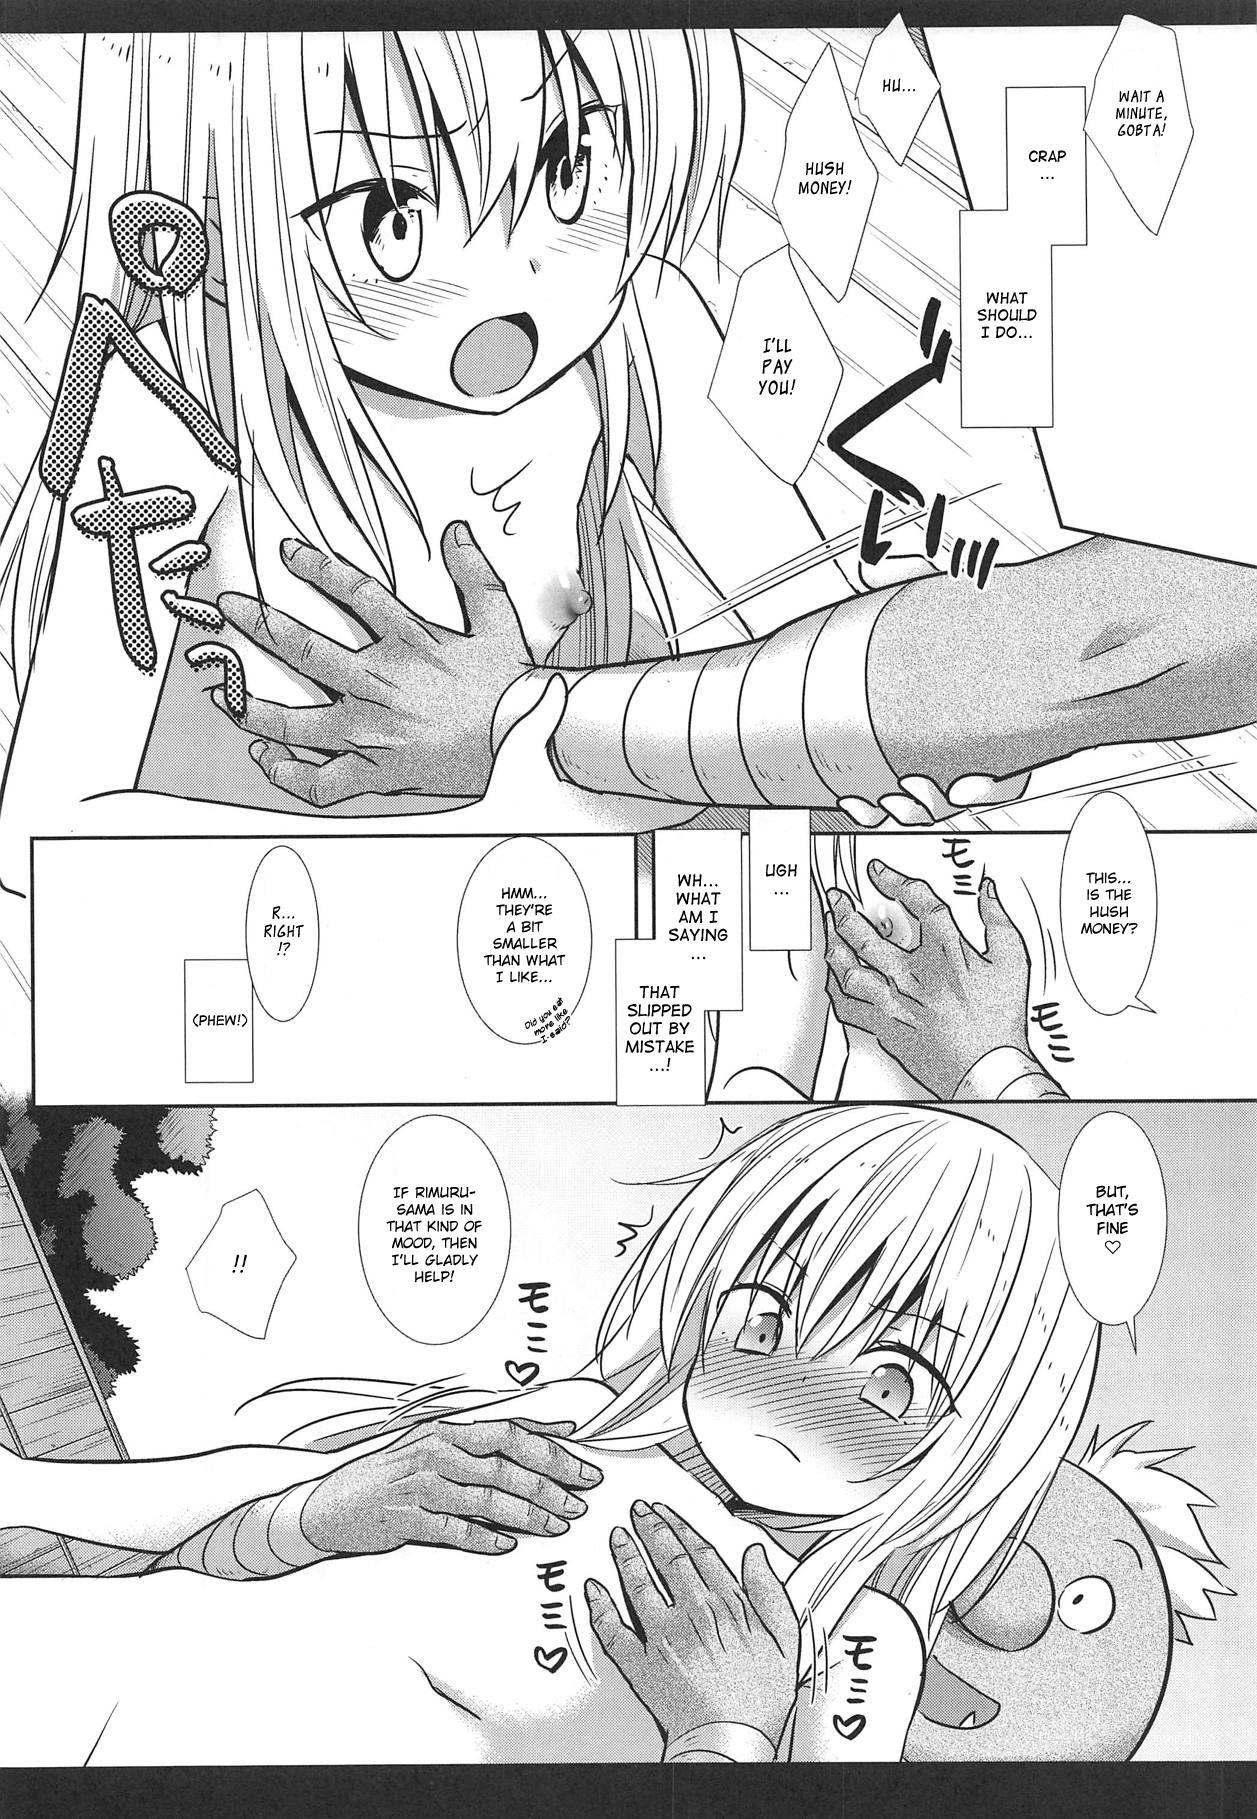 Masseuse That Time I Got Reincarnated in a Thin Book! "Even though I was a nearly 40 year old man, I still came like a girl..." - Tensei shitara slime datta ken Rabuda - Page 9